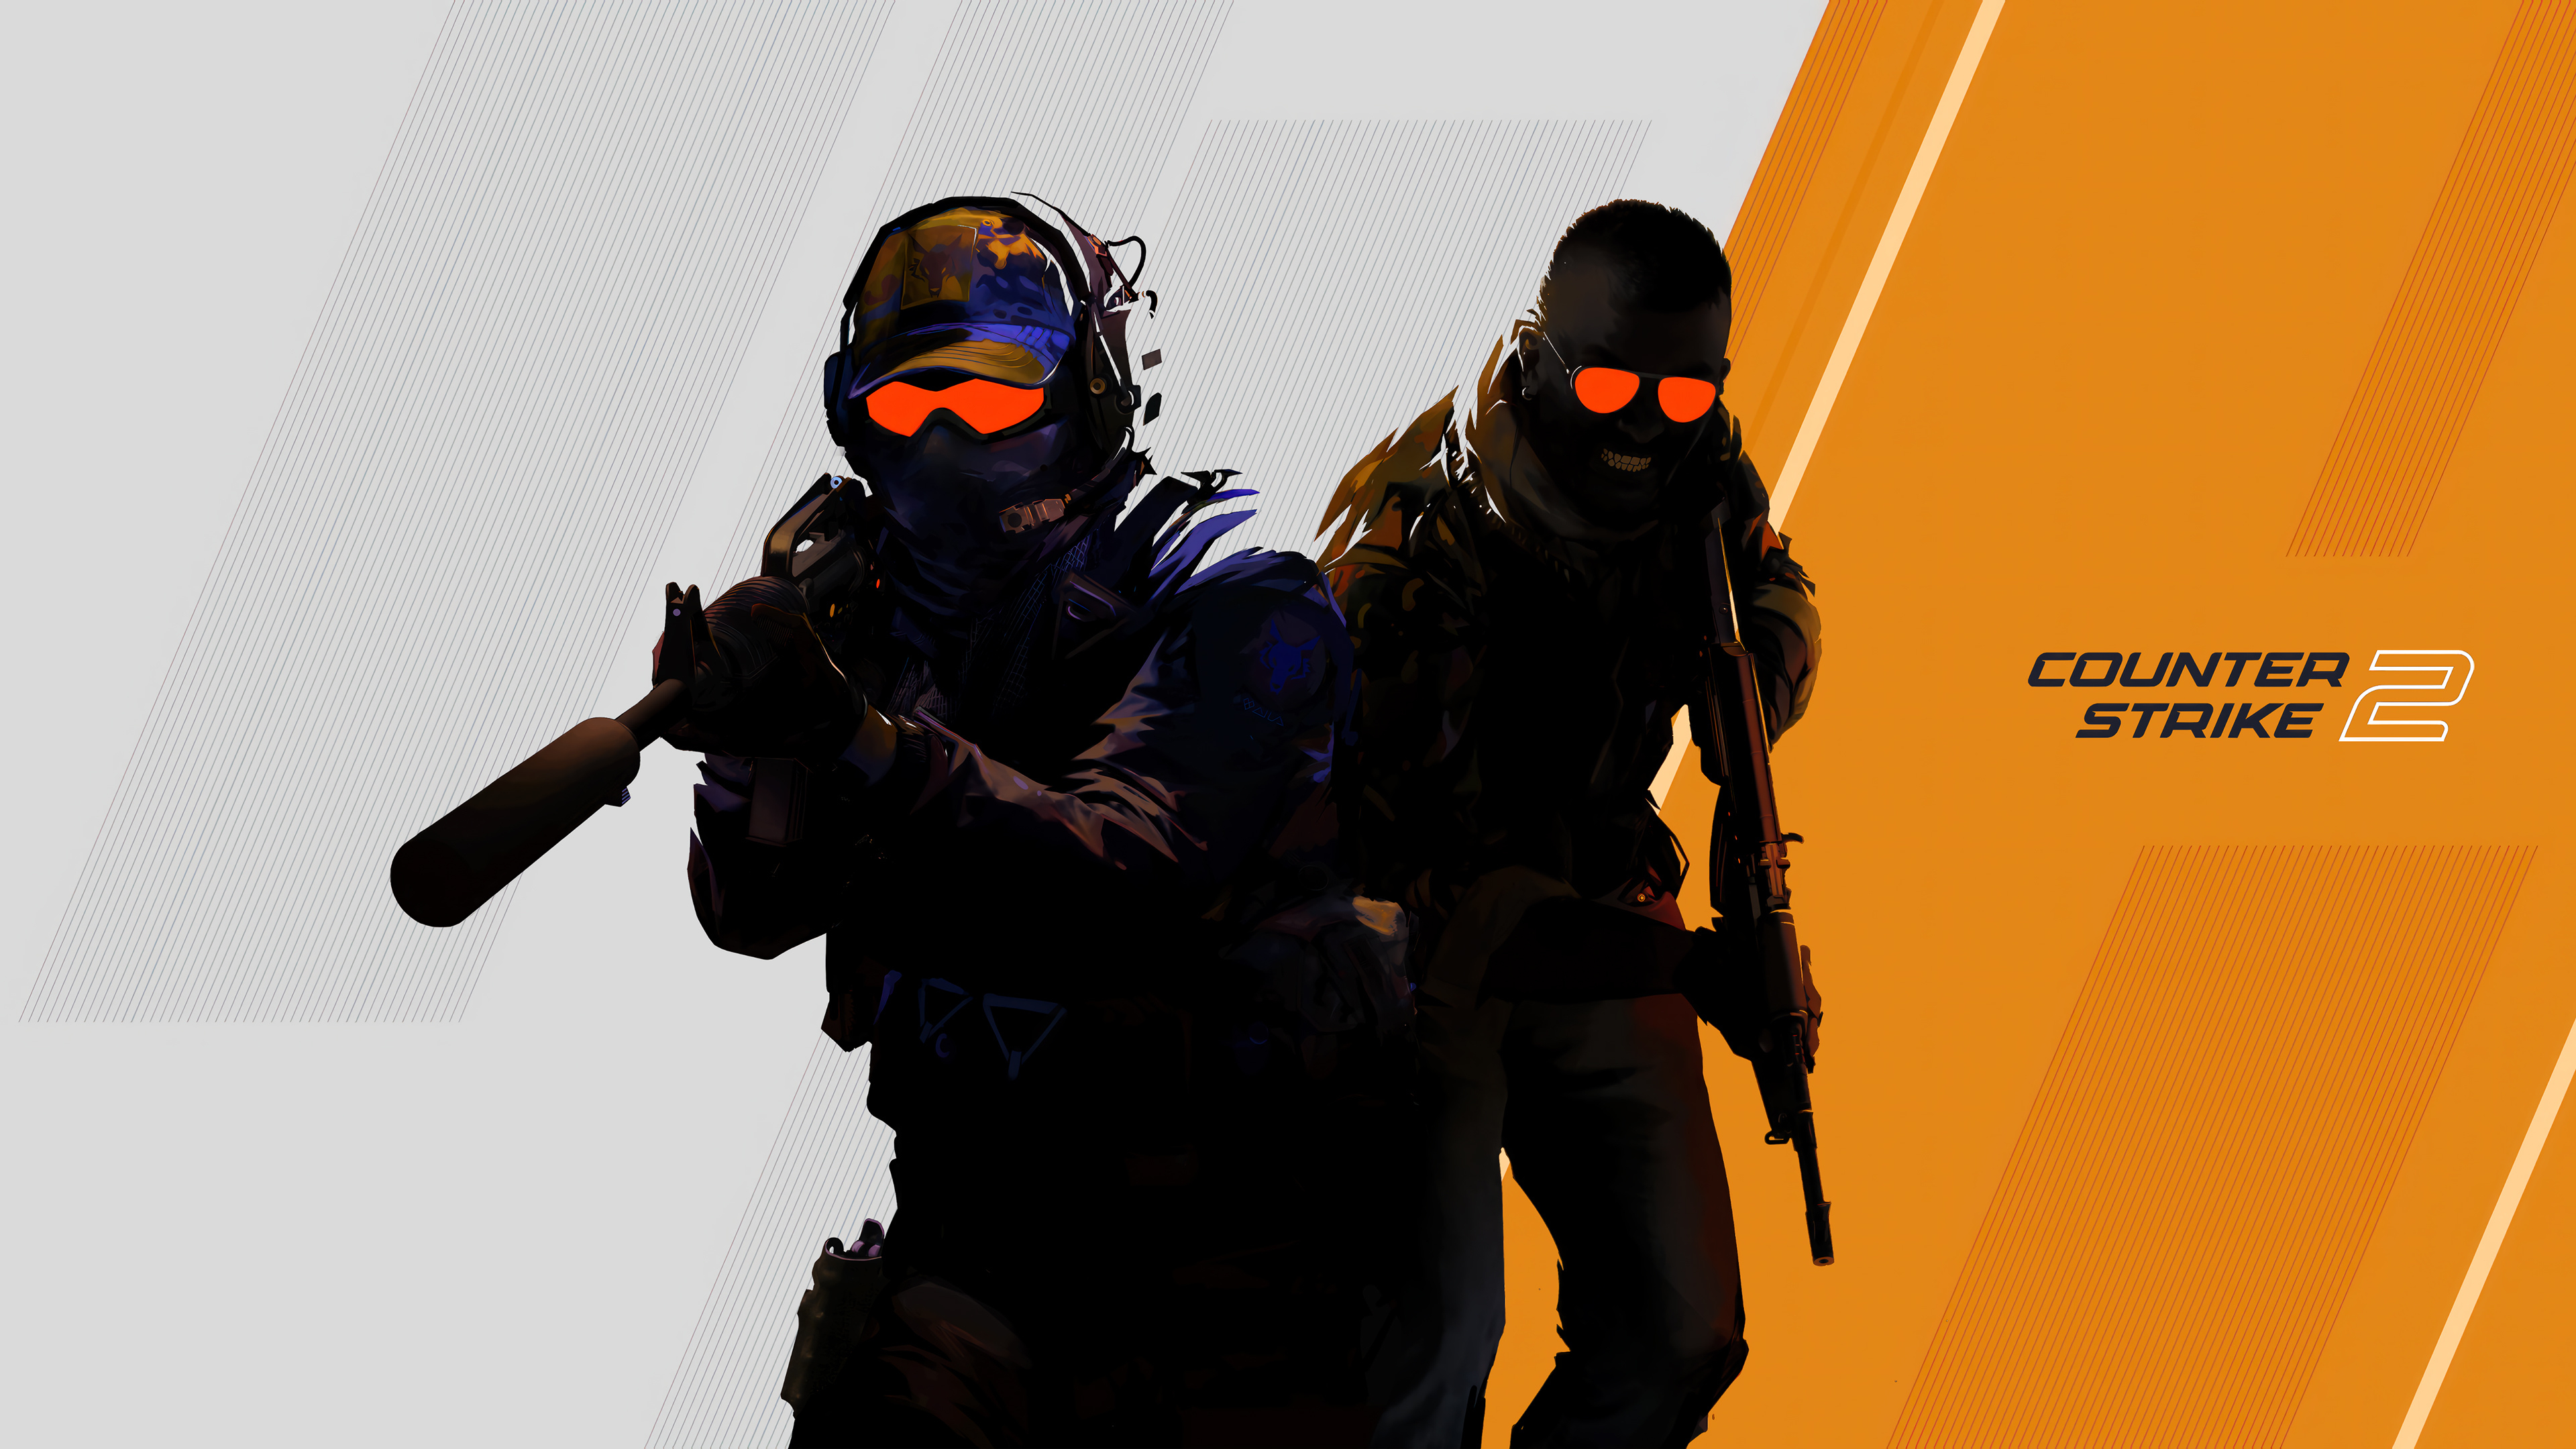 Download wallpaper 950x1534 counter-strike: global offensive, a